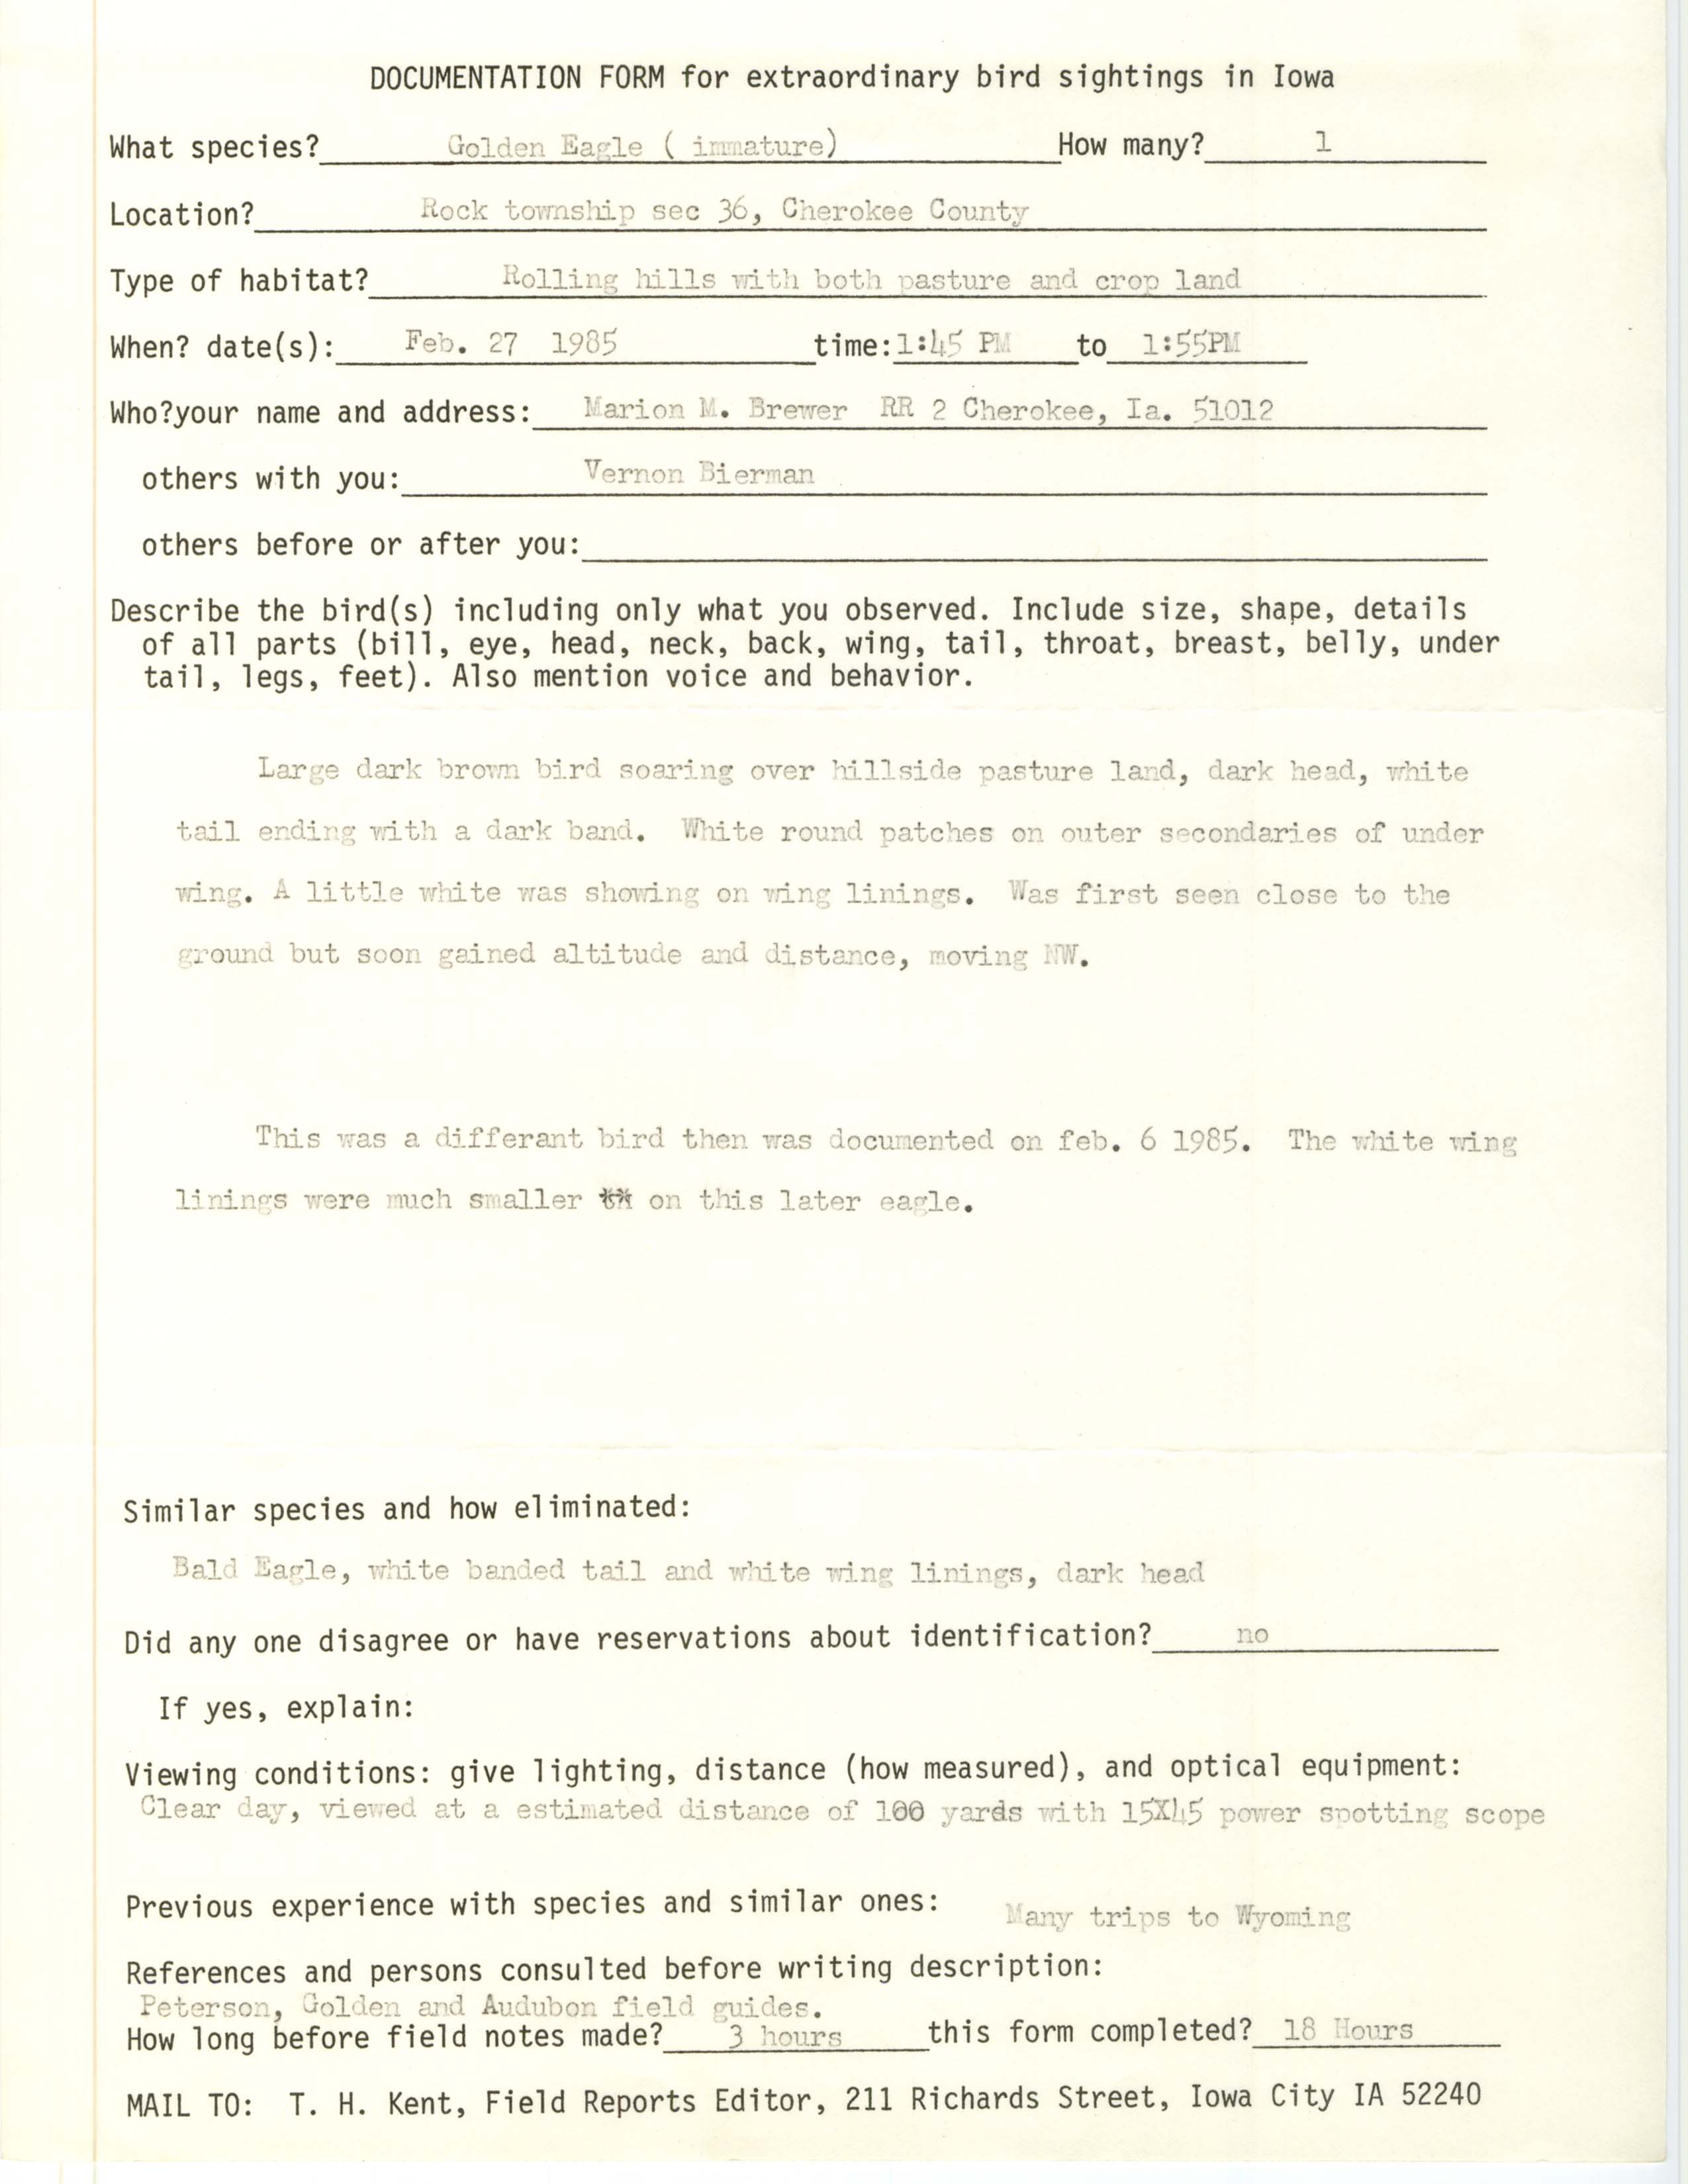 Rare bird documentation form for Golden Eagle at Rock Township in Cherokee County, 1985